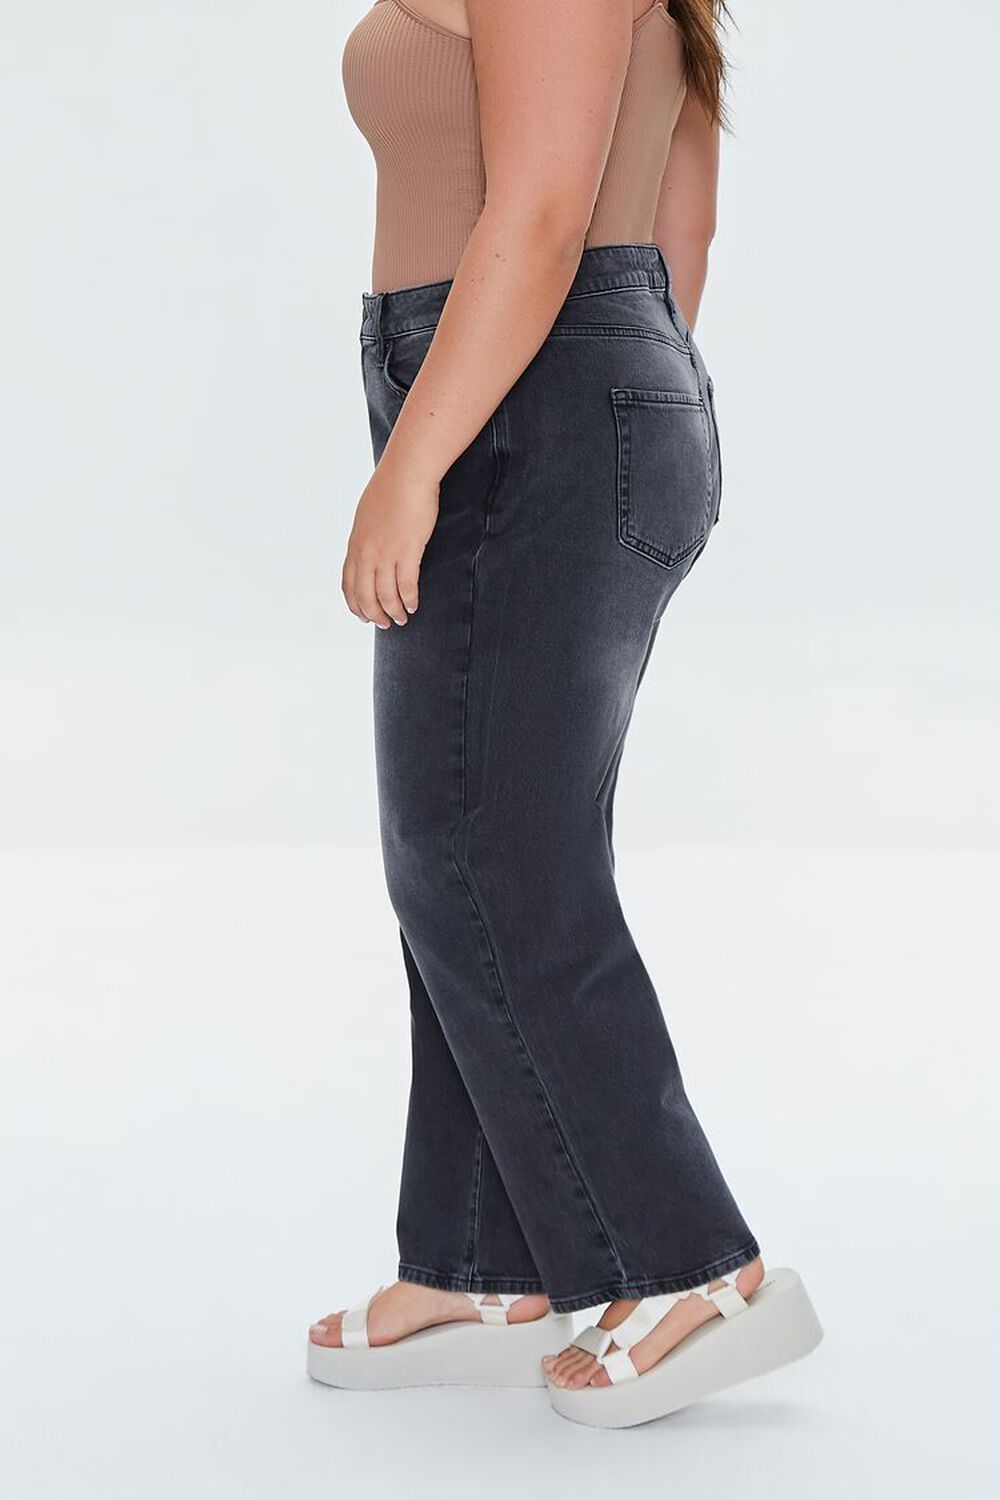 WASHED BLACK Plus Size 90s-Fit High-Rise Jeans, image 3